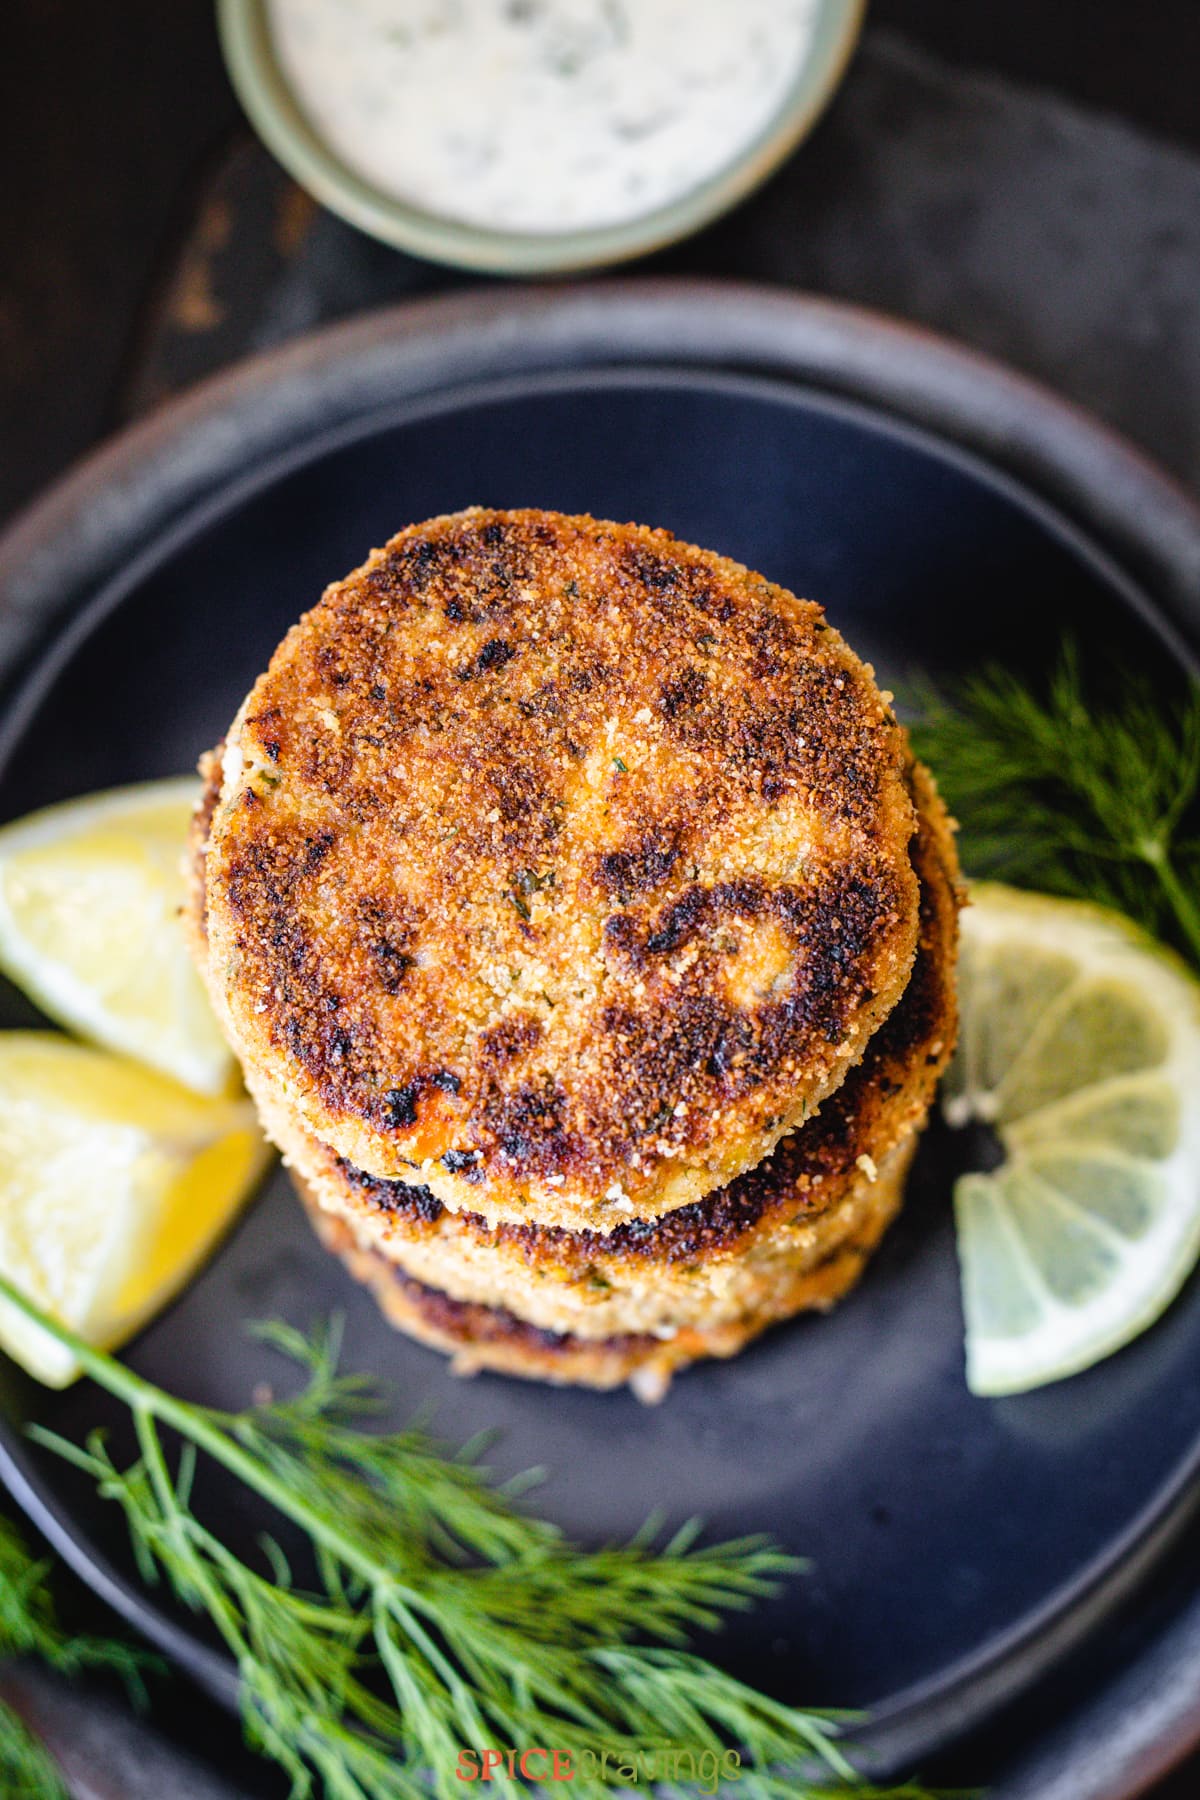 Top view of salmon cakes stacked on each other